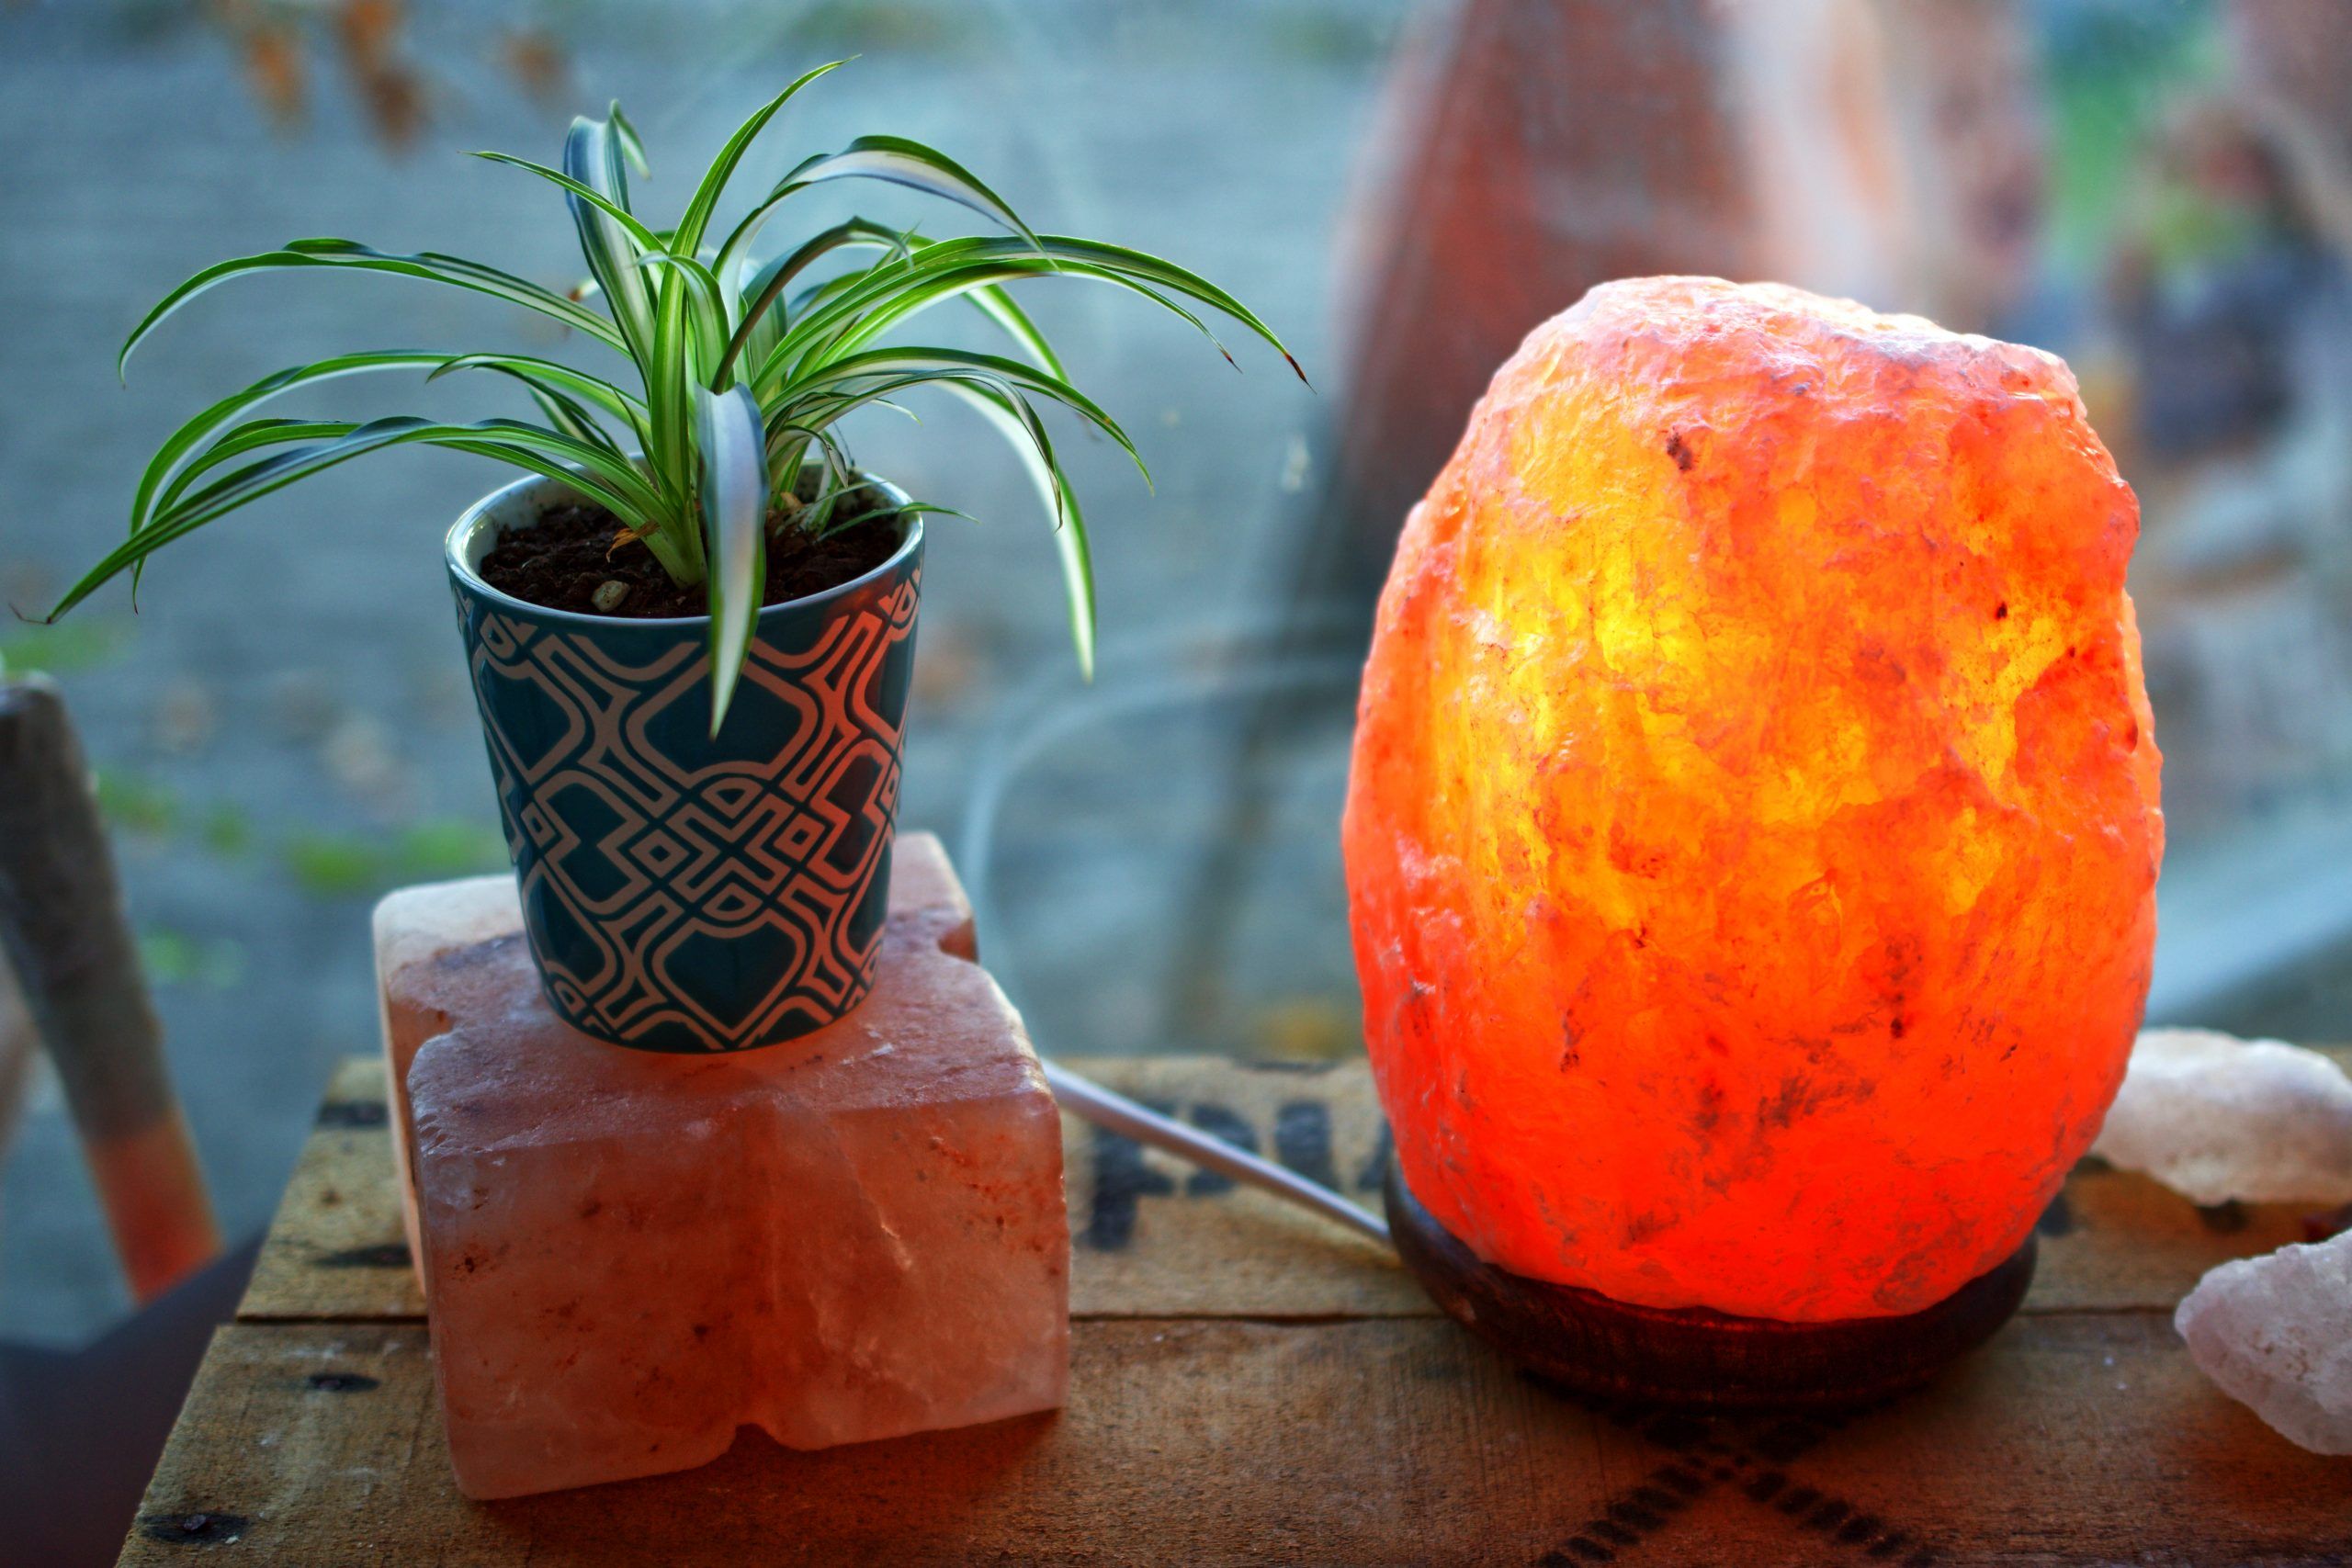 Himalayan salt lamps are pretty, but don't expect magic. Stock/Getty